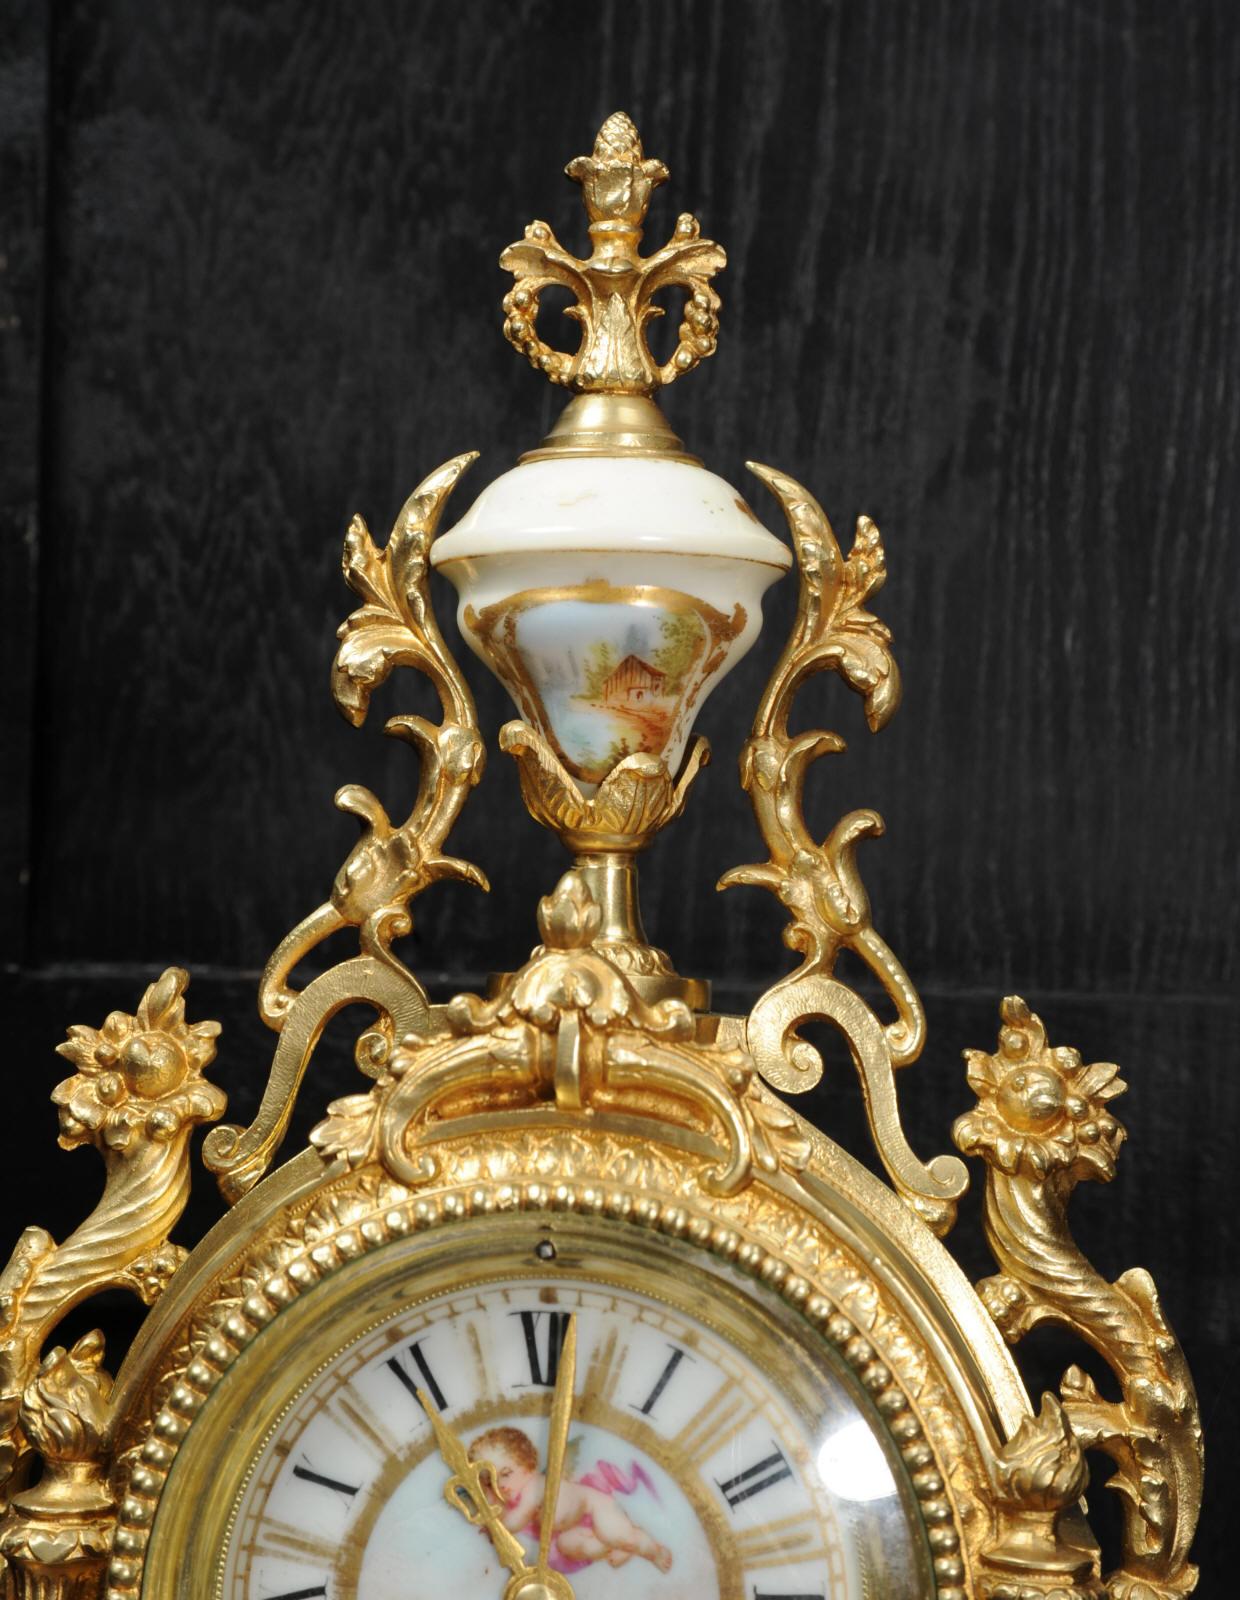 Antique French Ormolu and Sevres Porcelain Clock, Love 2